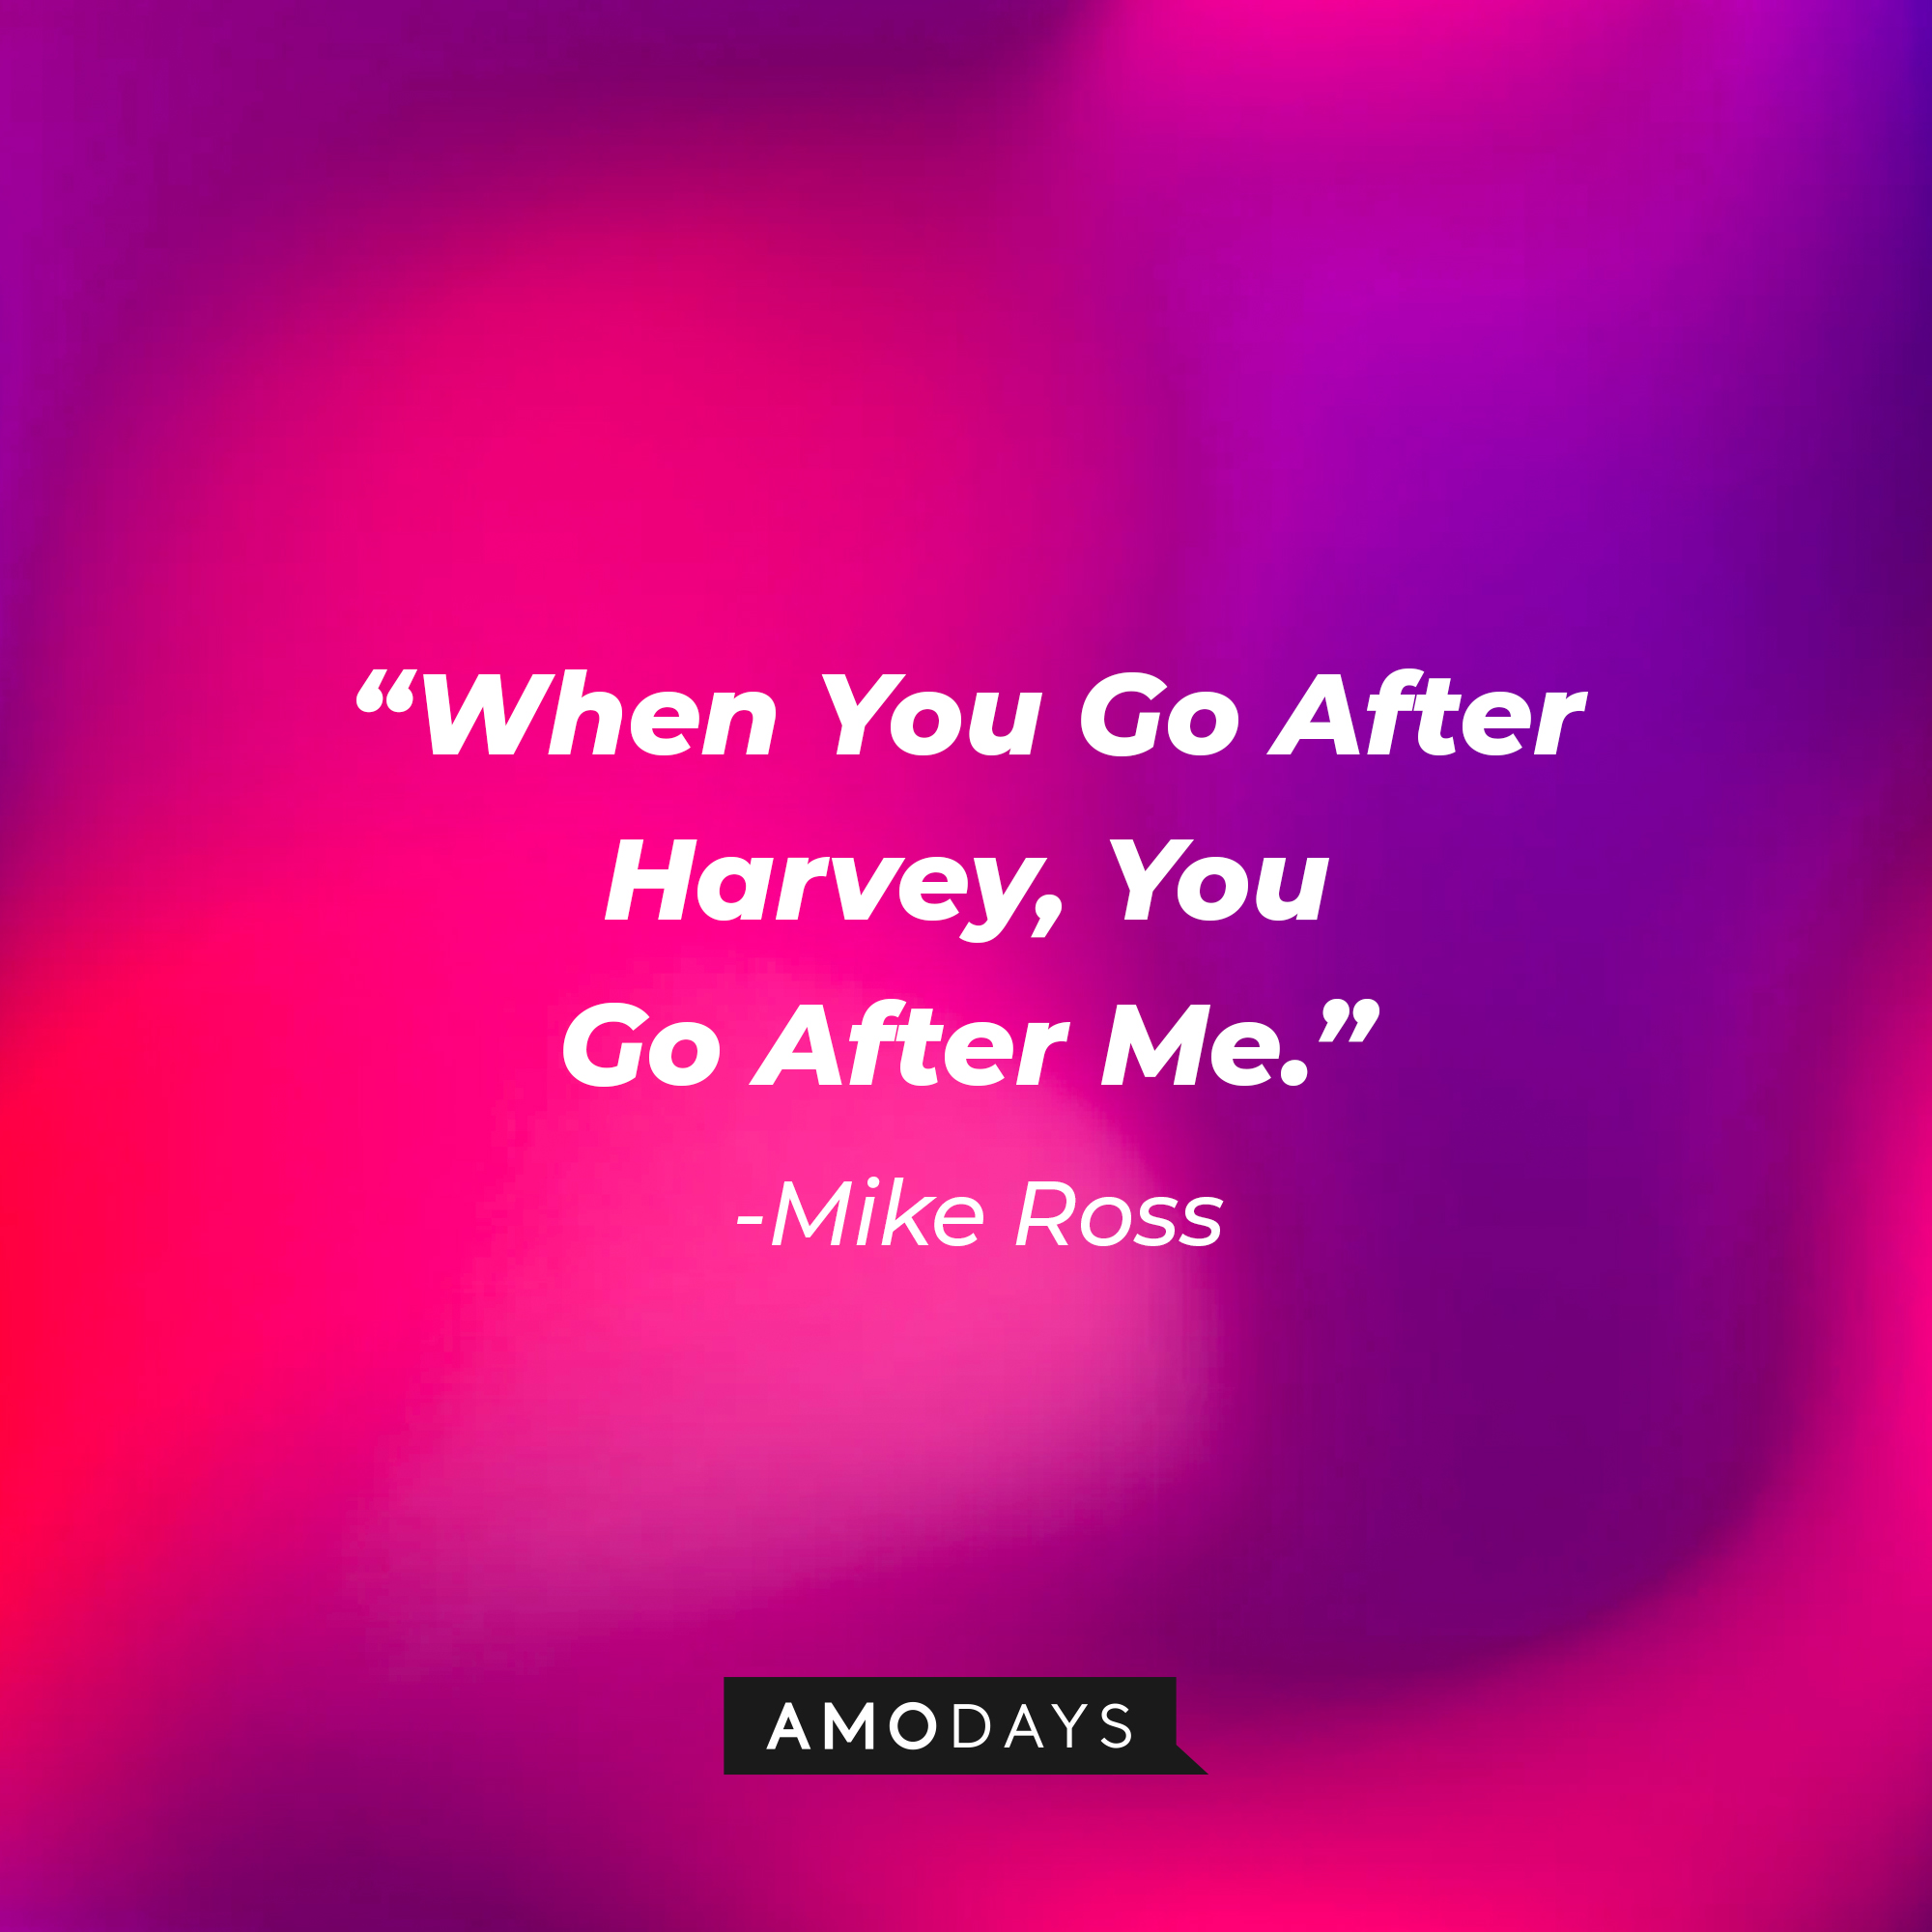 Mike Ross's quote from "Suits" : "When You Go After Harvey, You Go After Me." | Source: Amodays